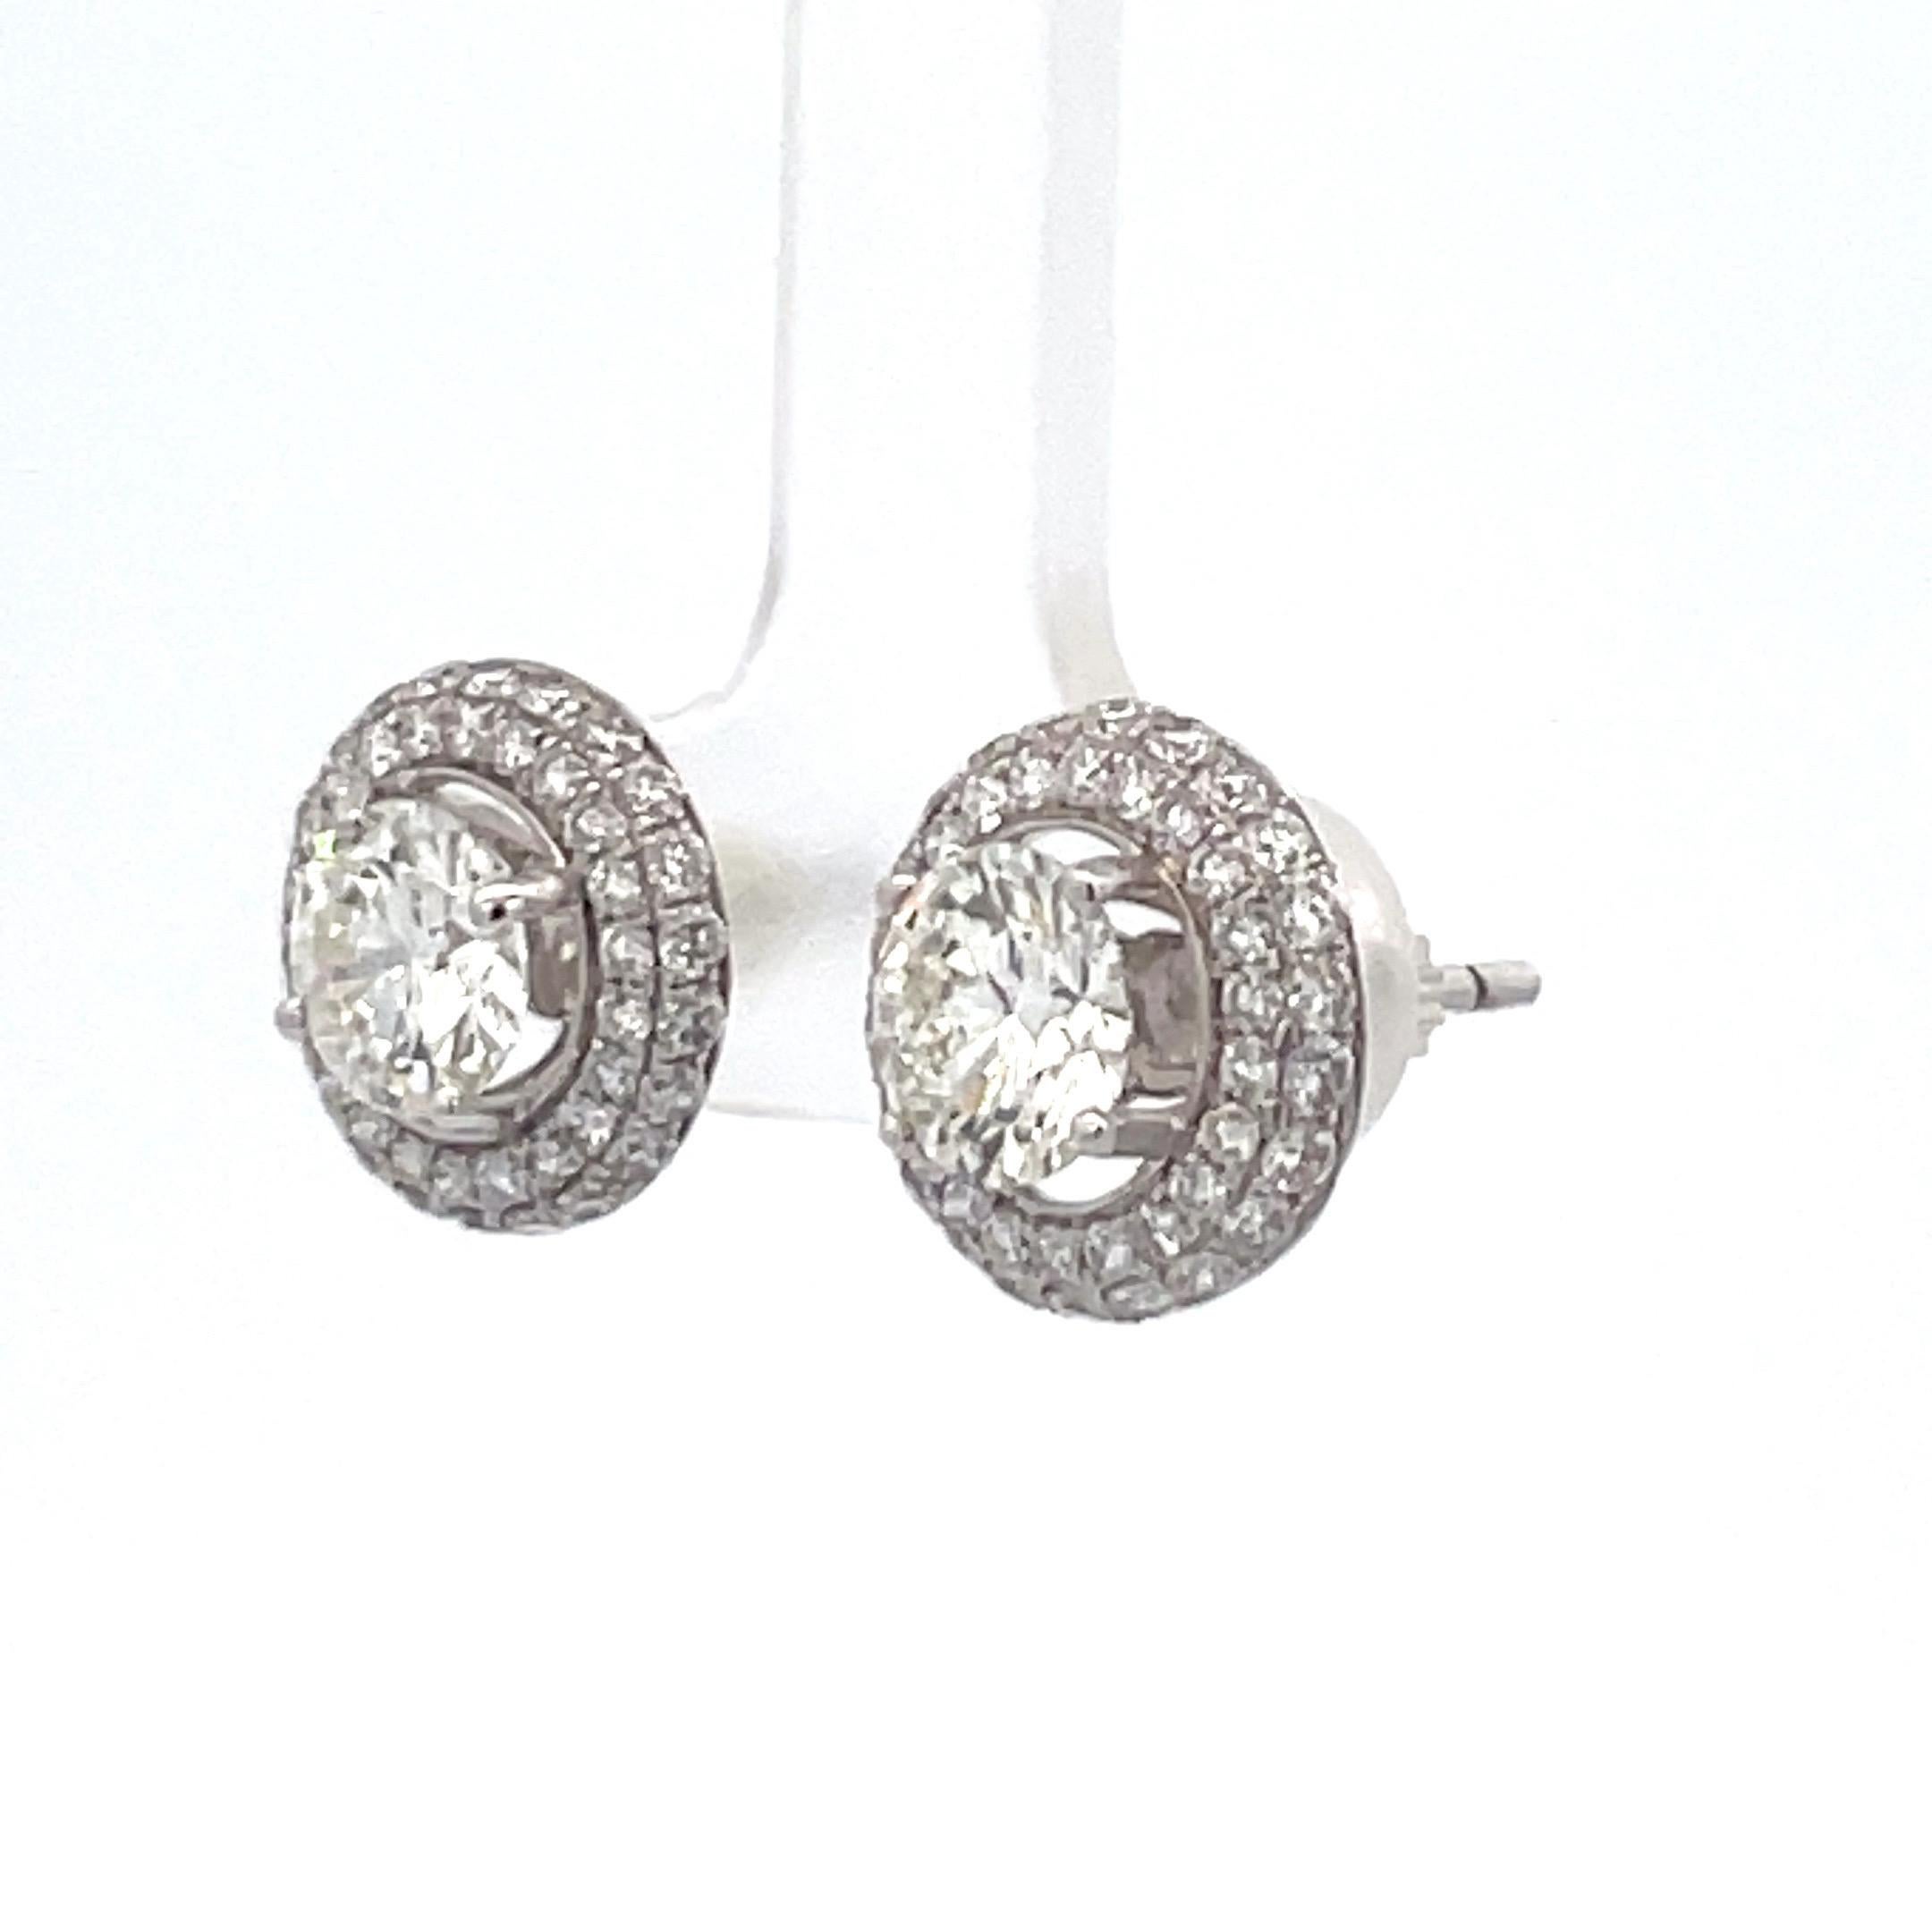 GIA Certified Diamond Stud Earrings 2.01 Carats J SI1 18 Karat White Gold In New Condition For Sale In New York, NY